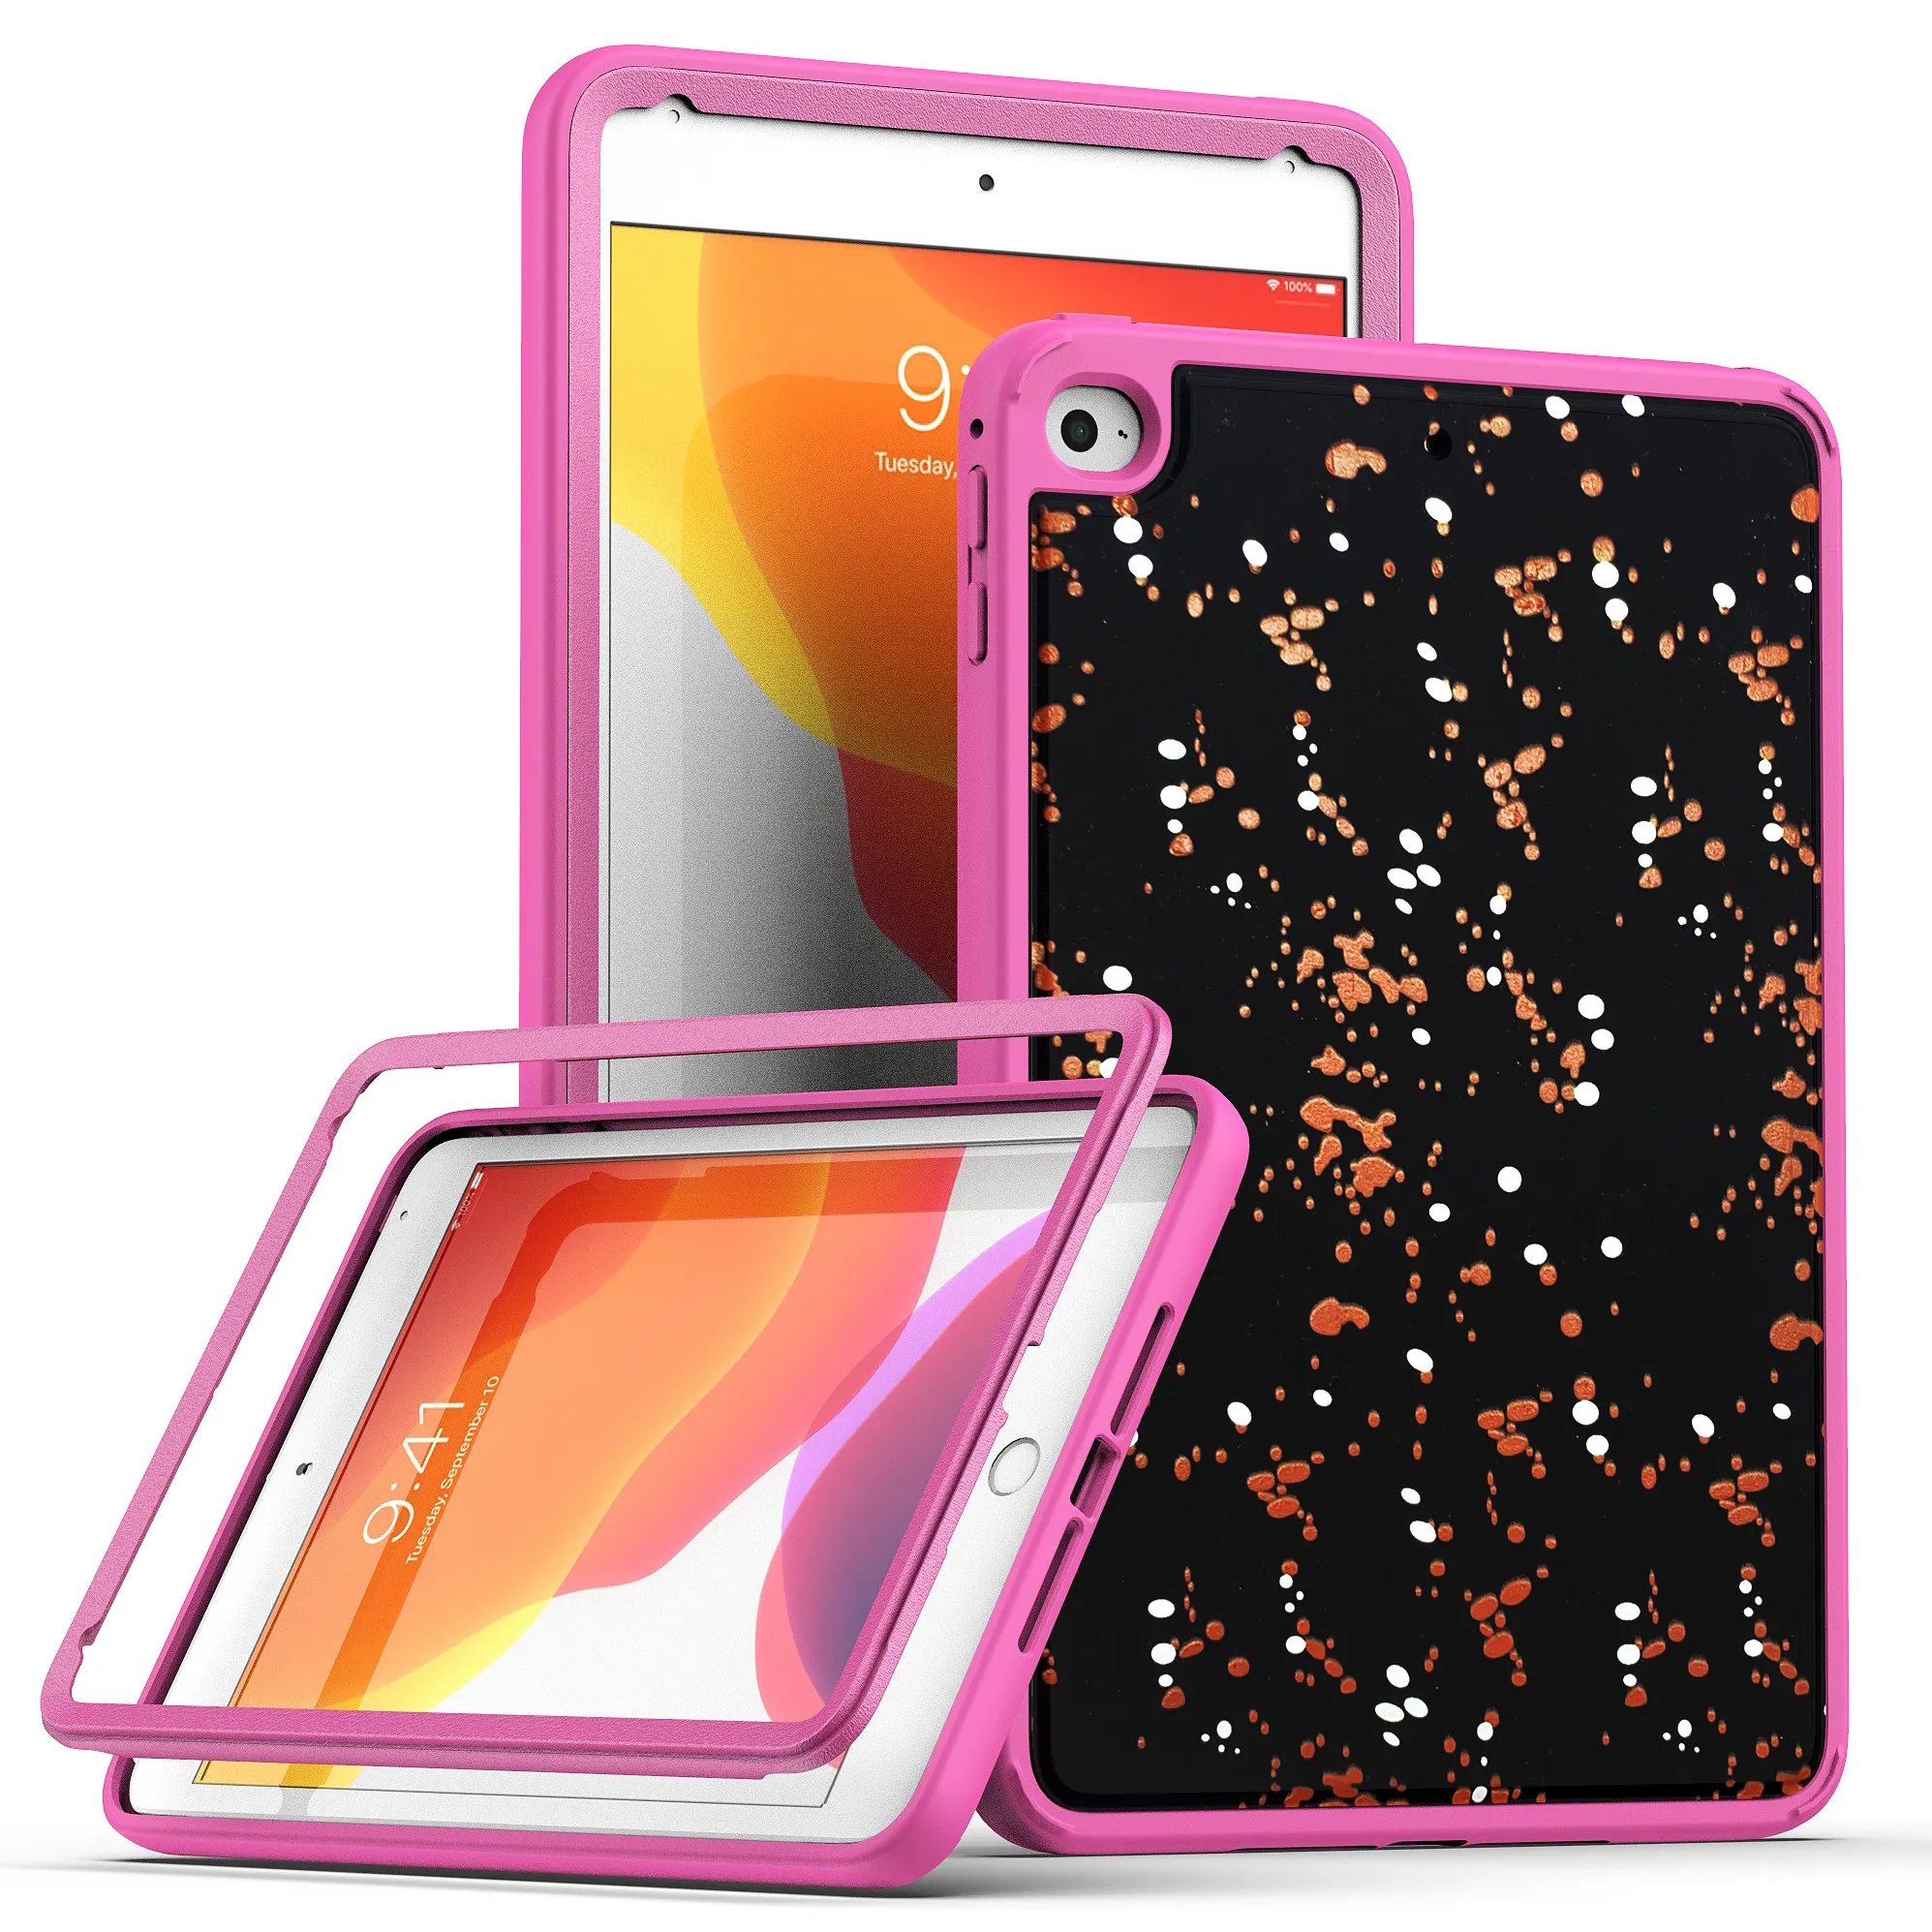 Ultra Slim Soft PU Dual Layer Tablet Cover For shock proof 6 8.3 Inch ipad mini 4 case